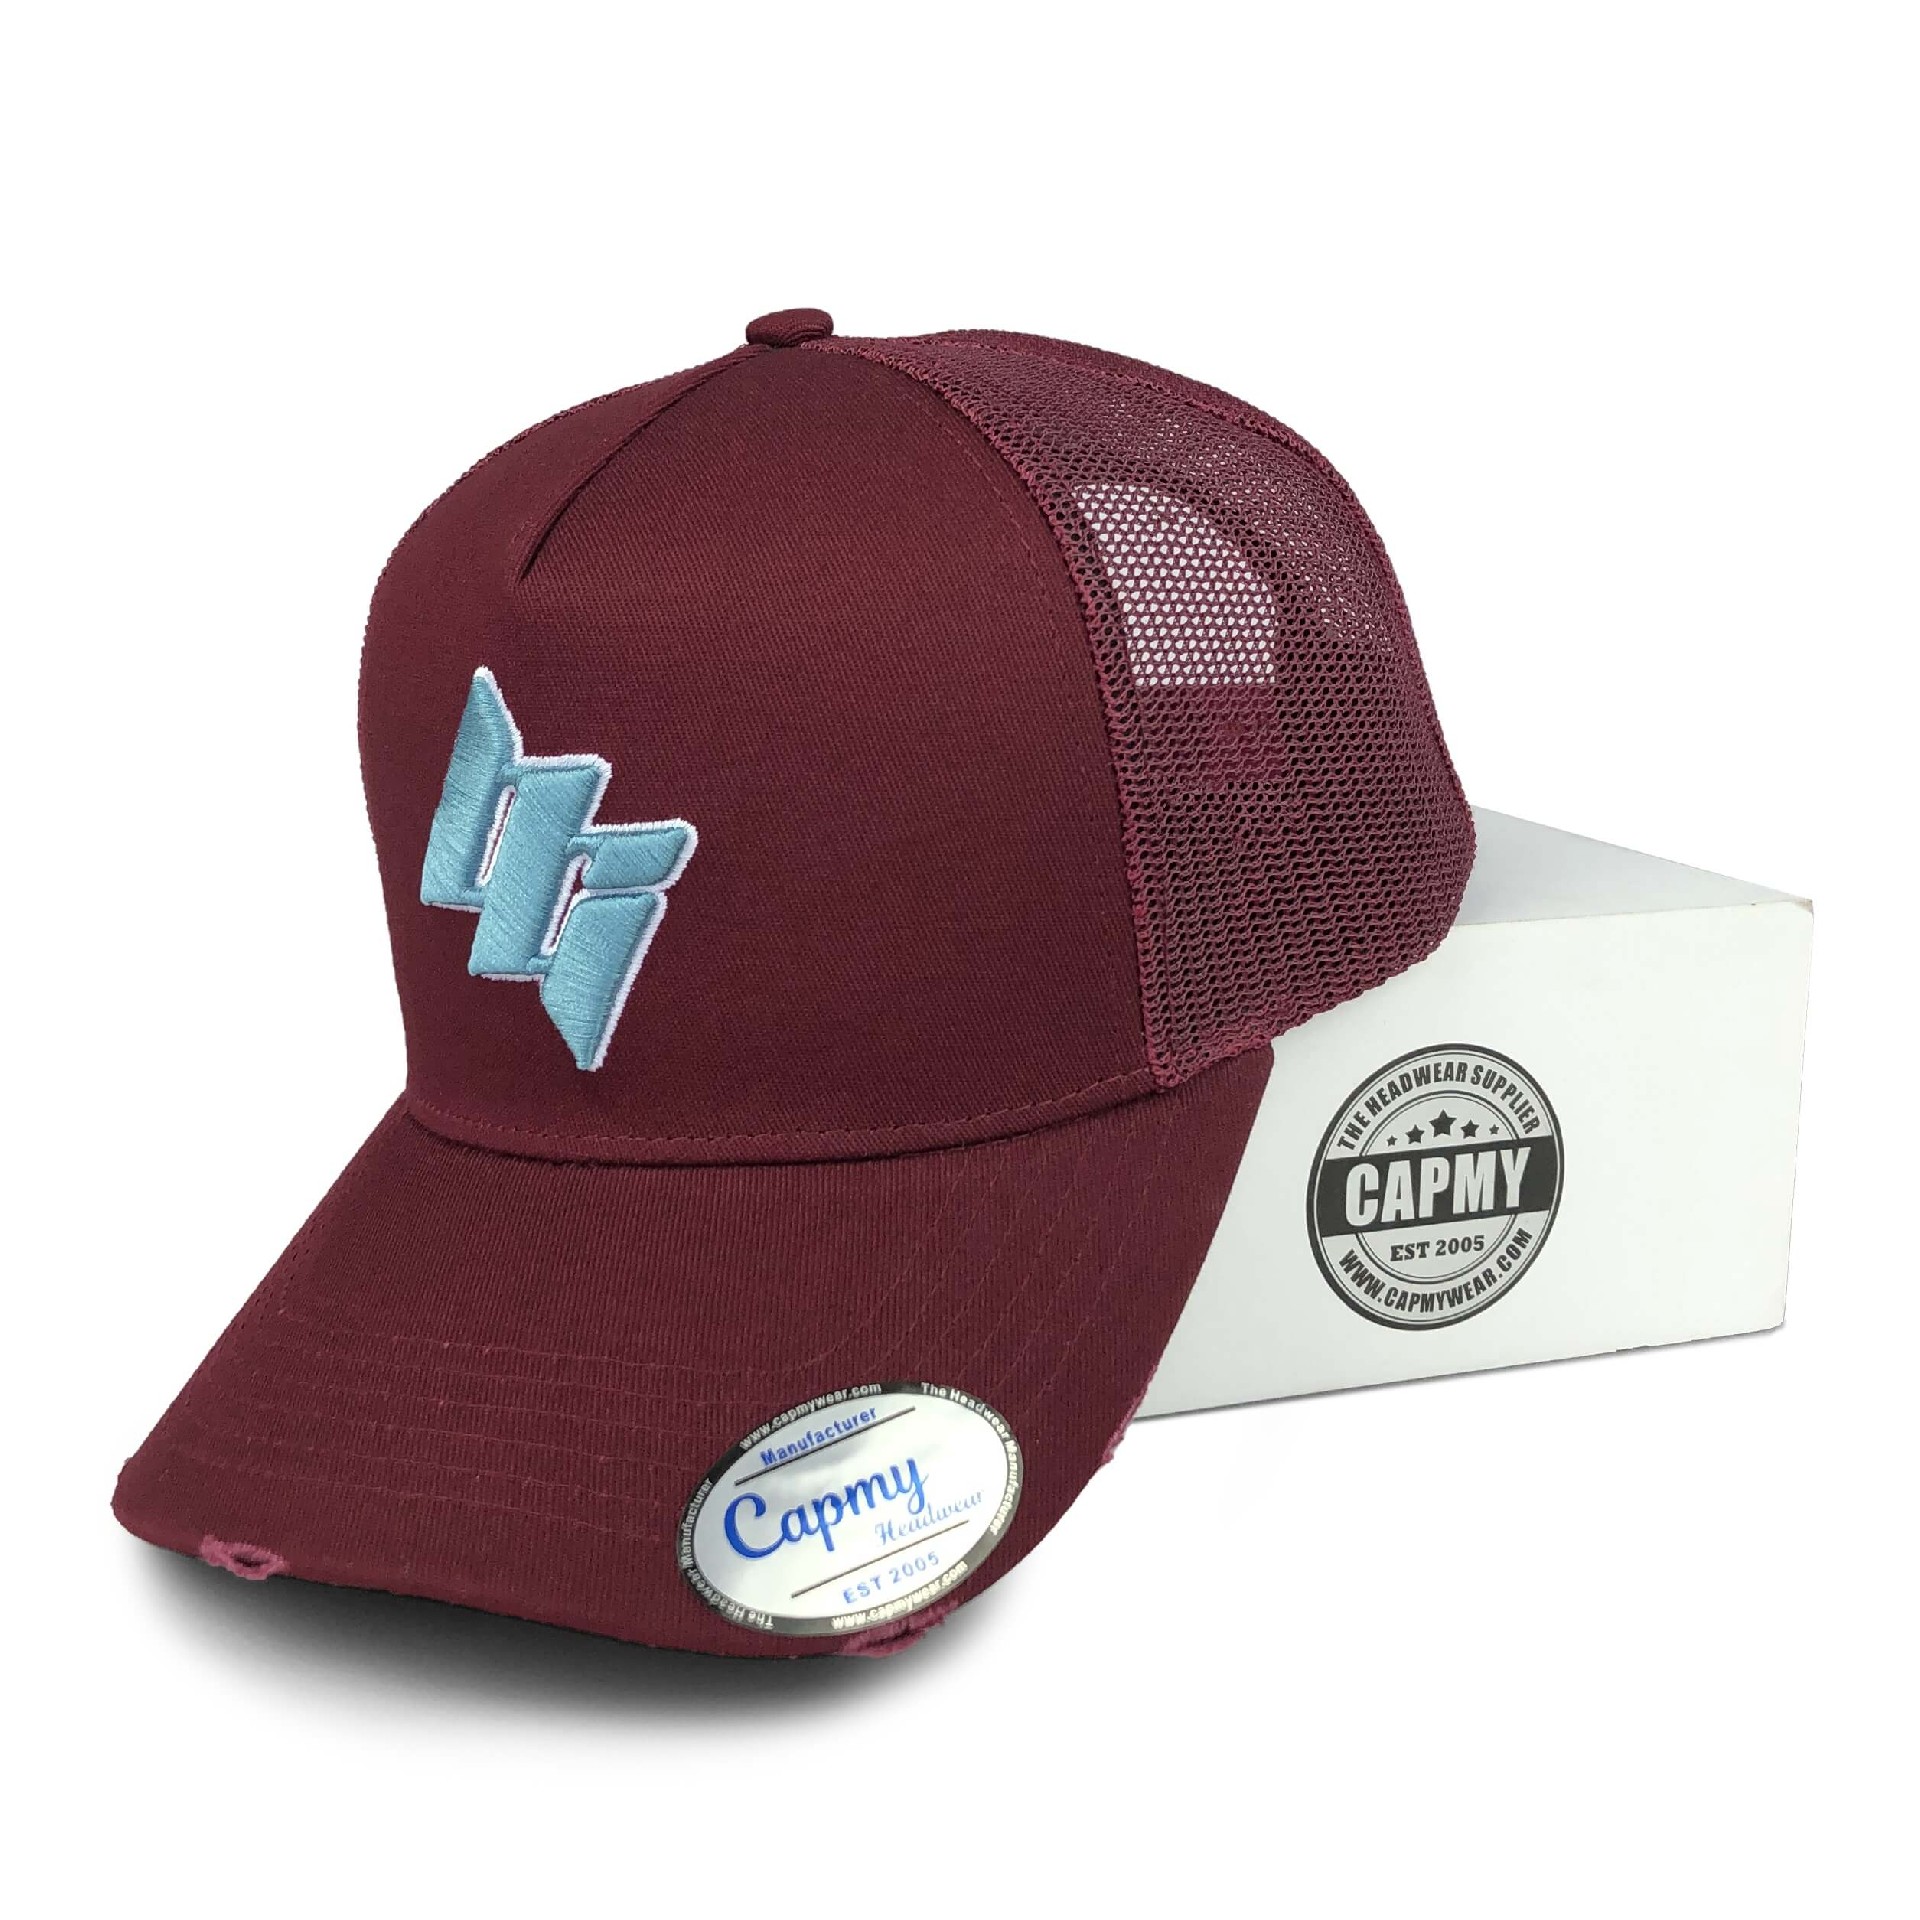 CMC-3119(Customized Cotton 5 Panel Embroidery New Mesh Trucker Cap With Vintage Distressed Rip Trucker Hats)